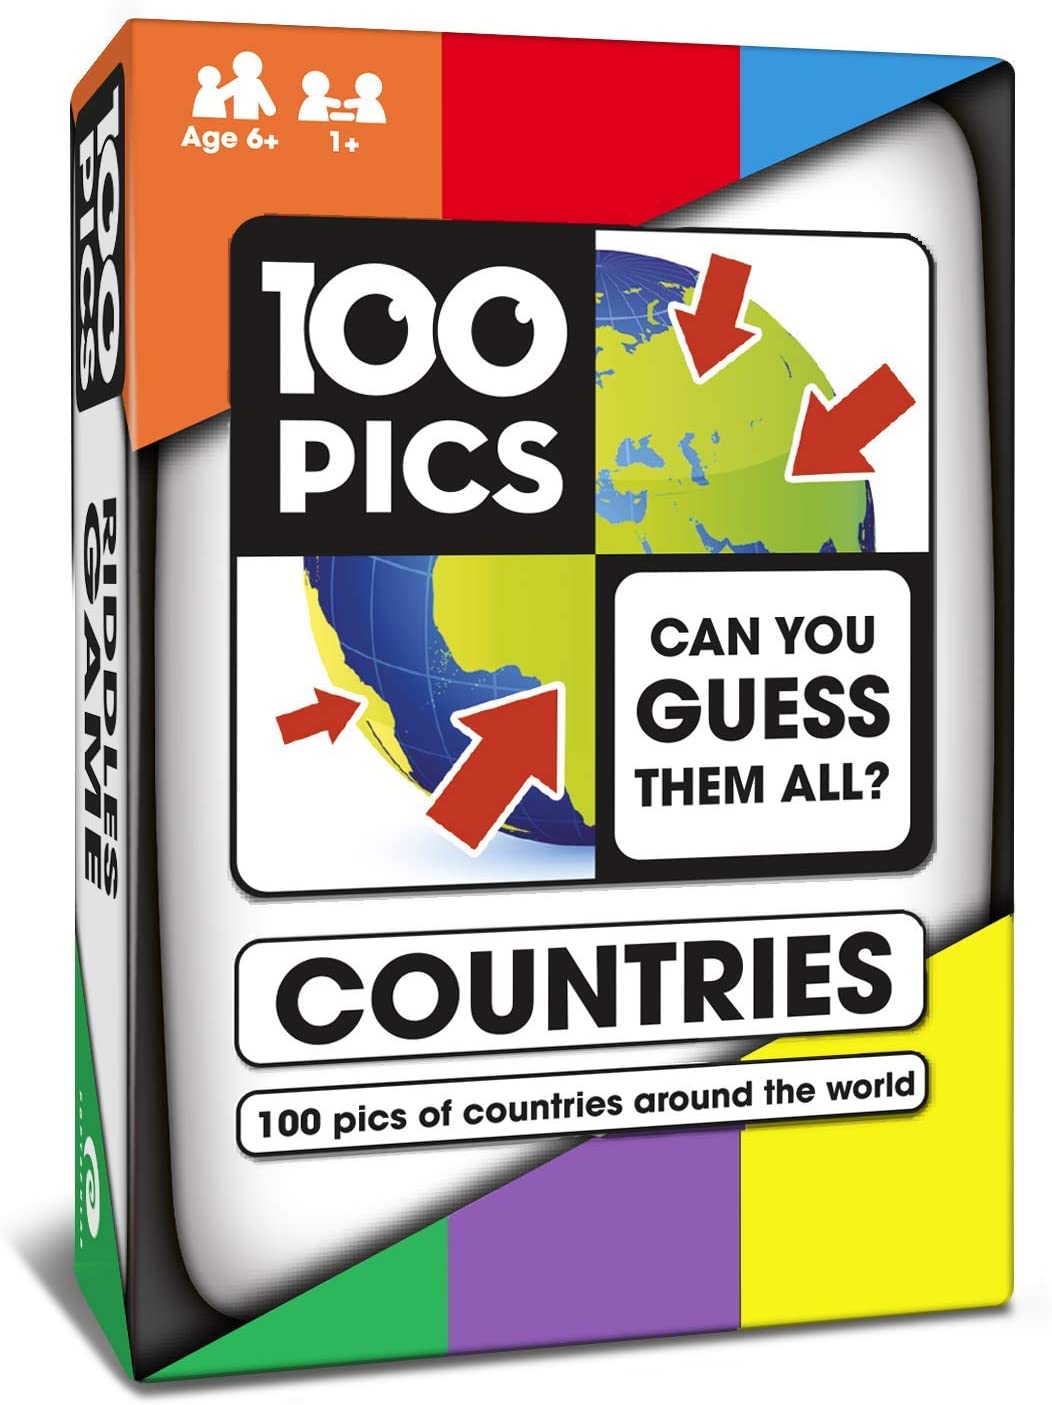 100 PICS Countries of the World Travel Game - Geography Flash Card Quiz, Pocket Puzzles